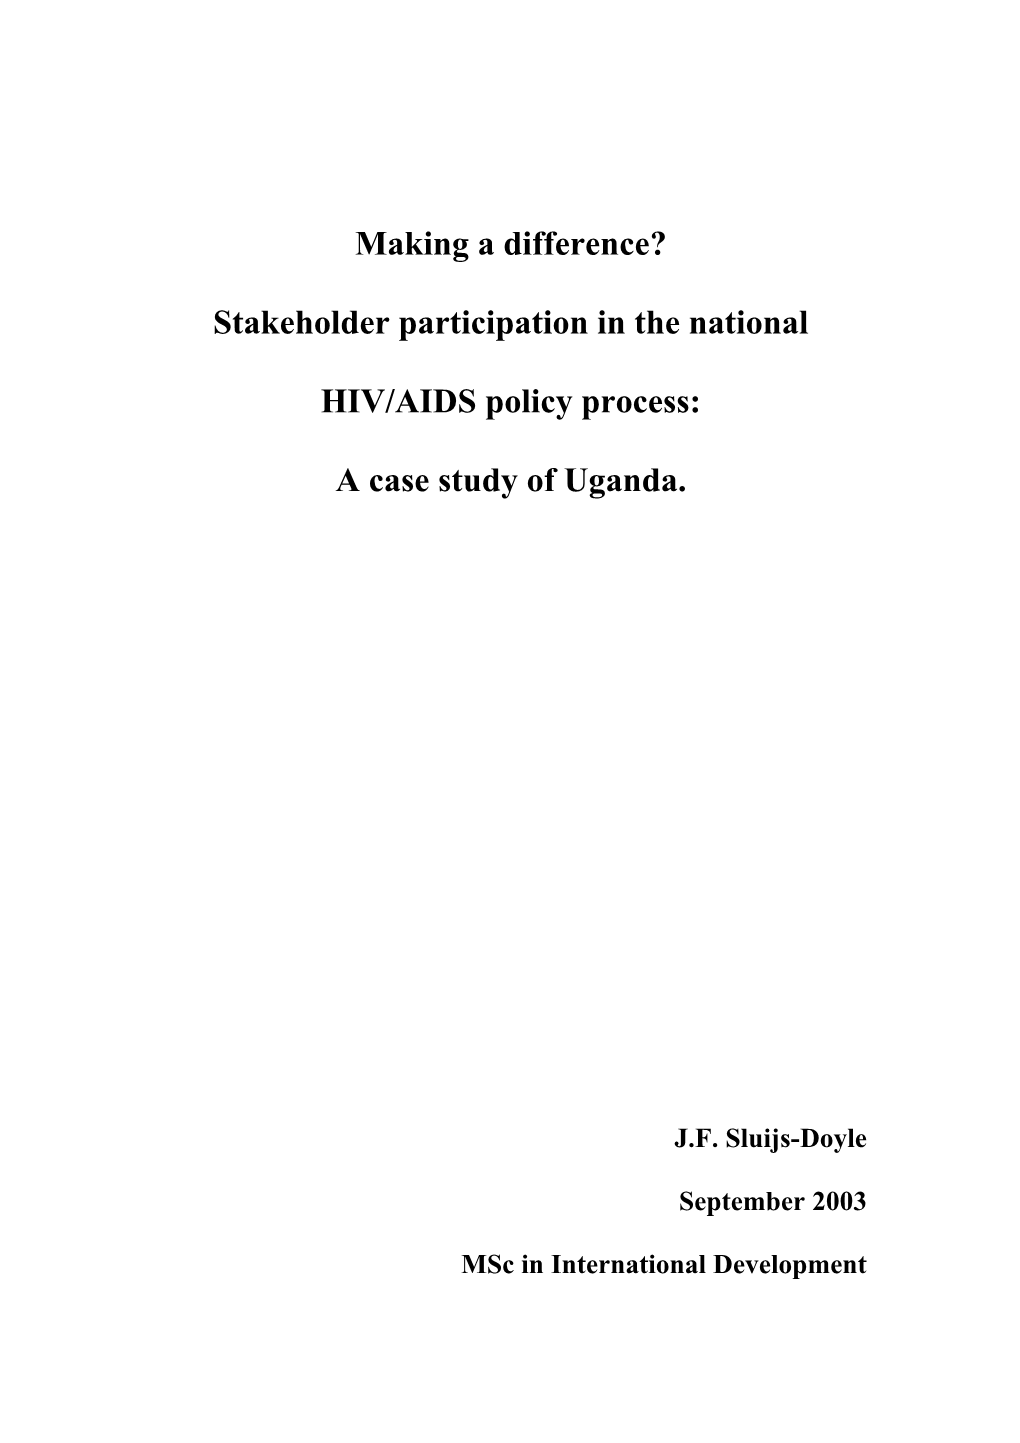 Stakeholder Participation in the National HIV/AIDS Policy Process